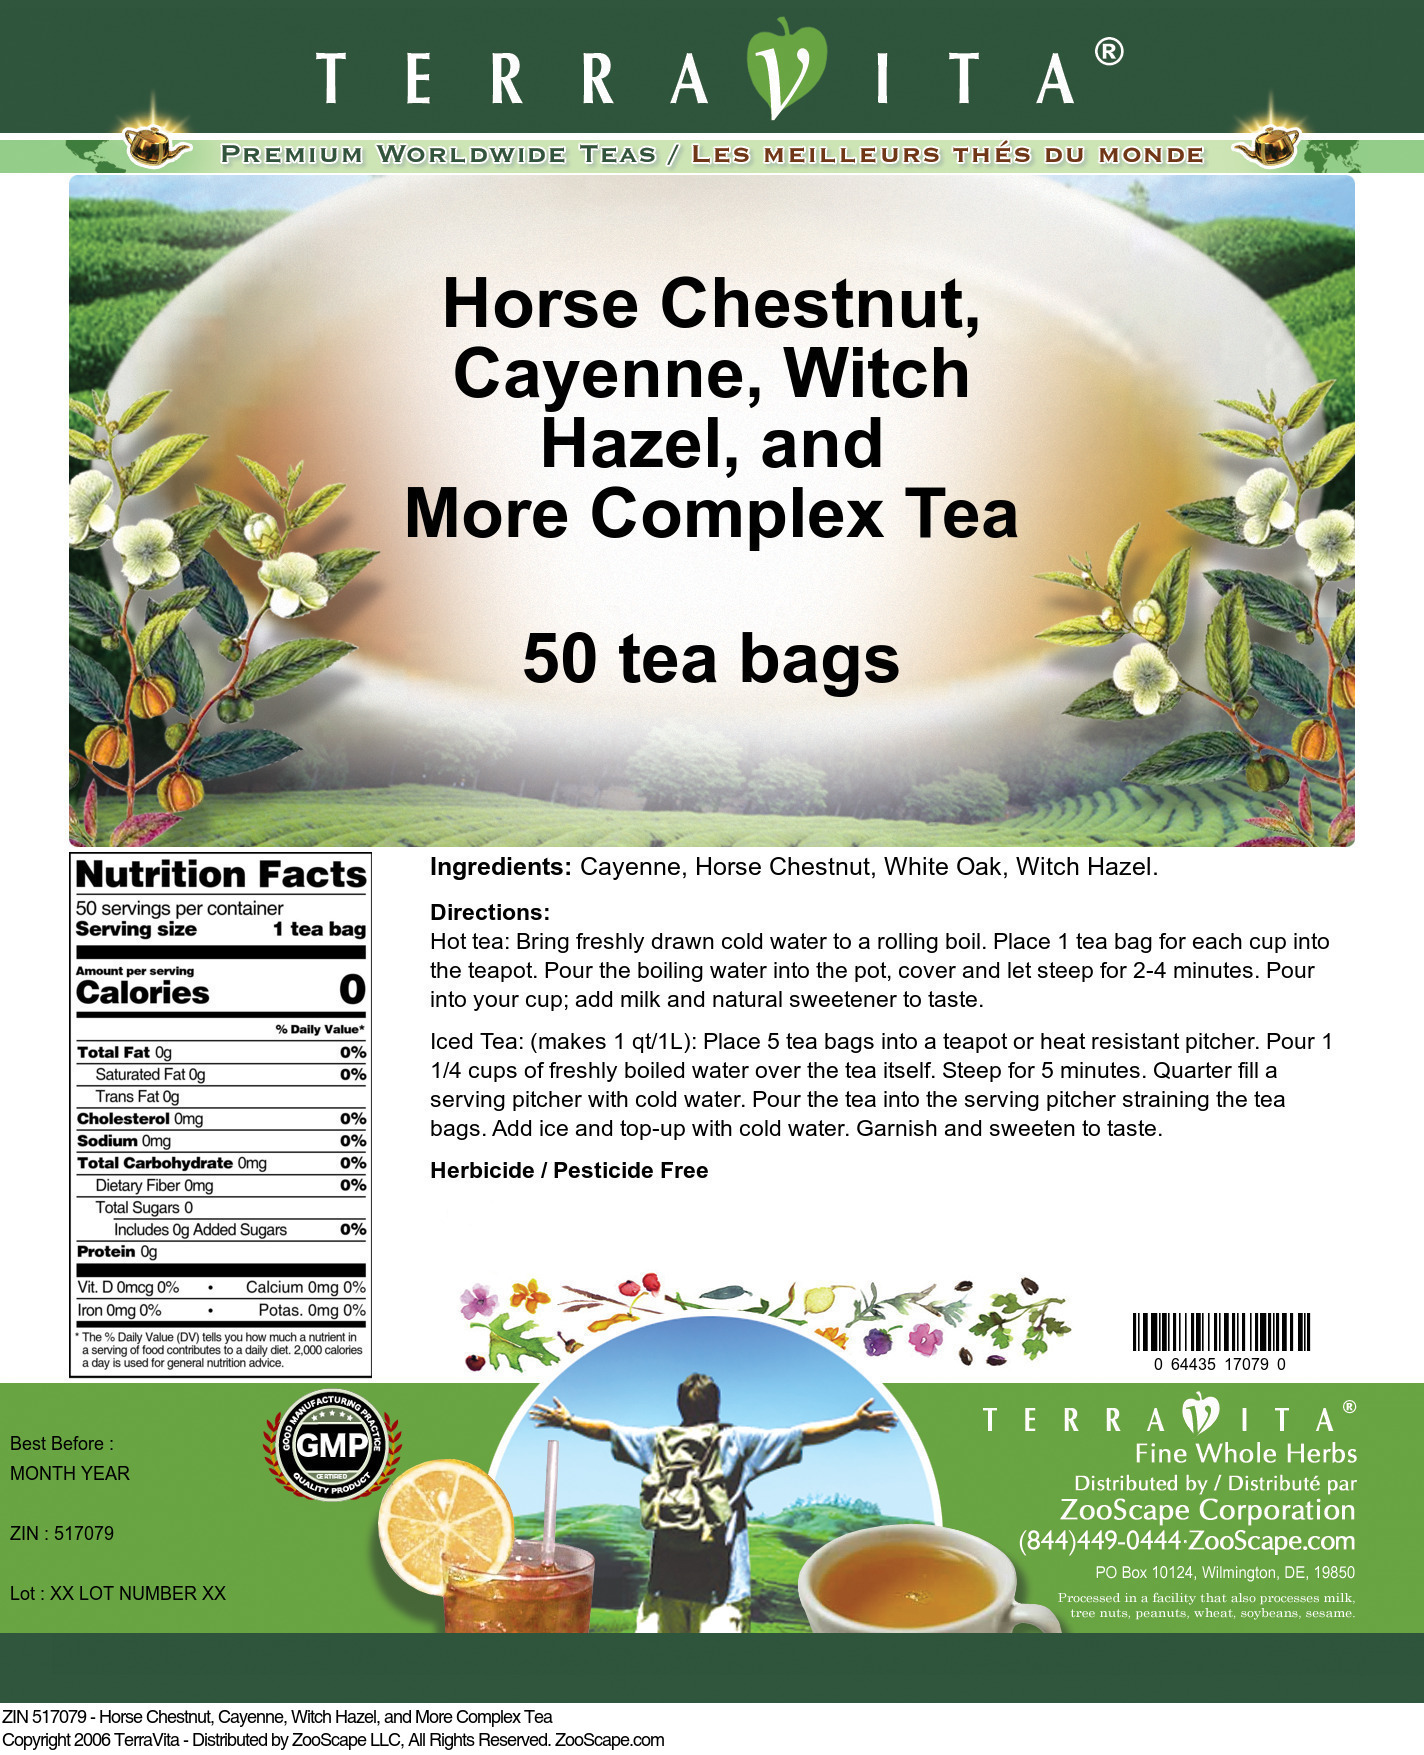 Horse Chestnut, Cayenne, Witch Hazel, and More Complex Tea - Label